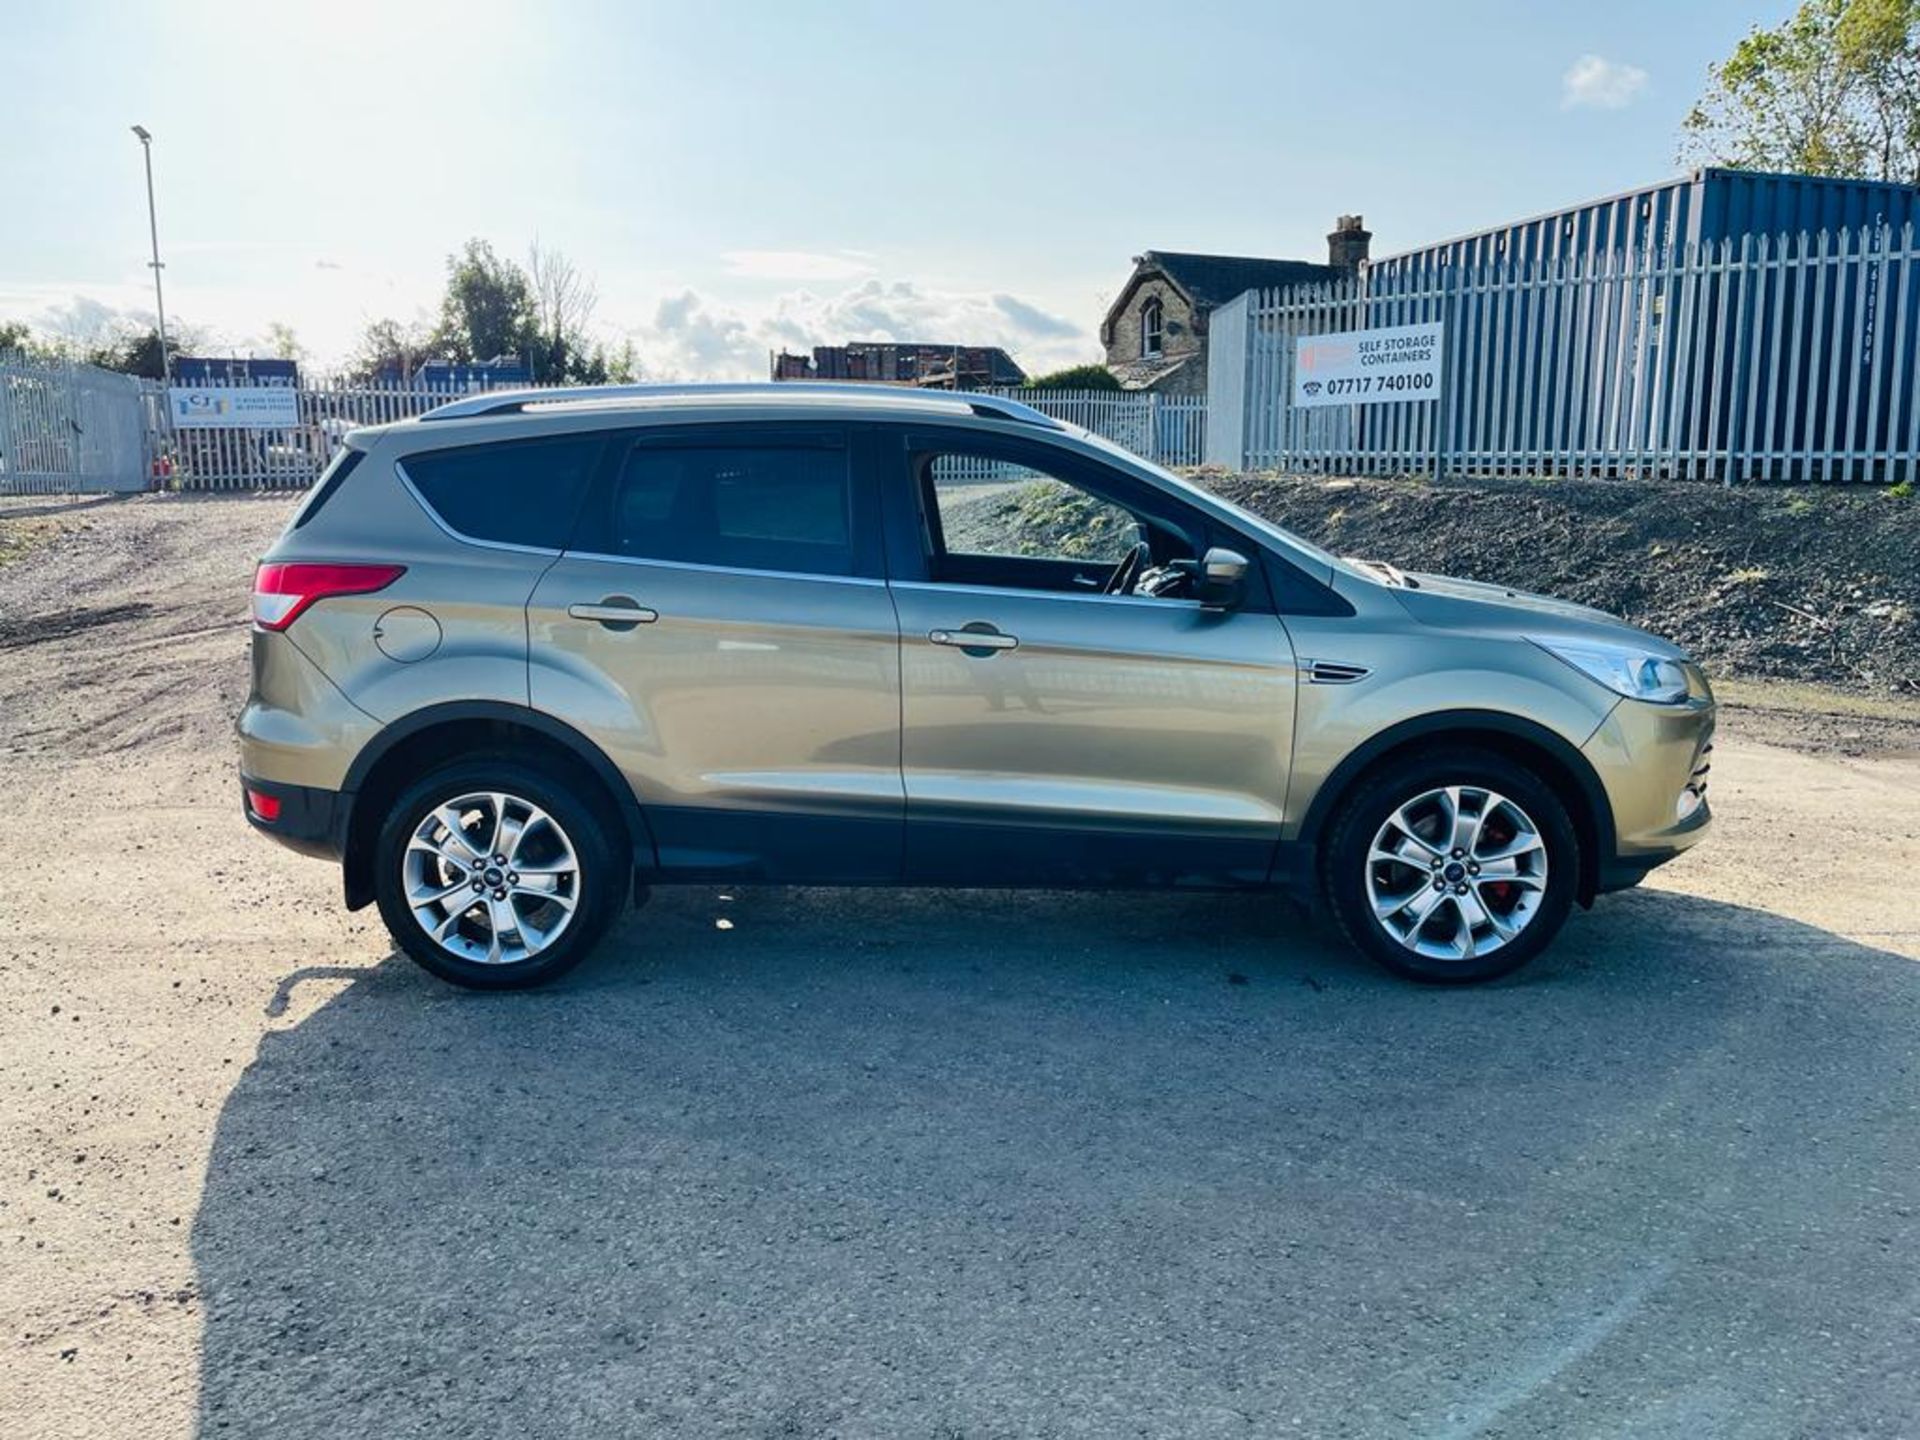 ** ON SALE ** Ford Kuga 2.0 TDCI 163 4WD Titanium 2013 (63 Reg) - No Vat - Air Conditioning - Image 3 of 32